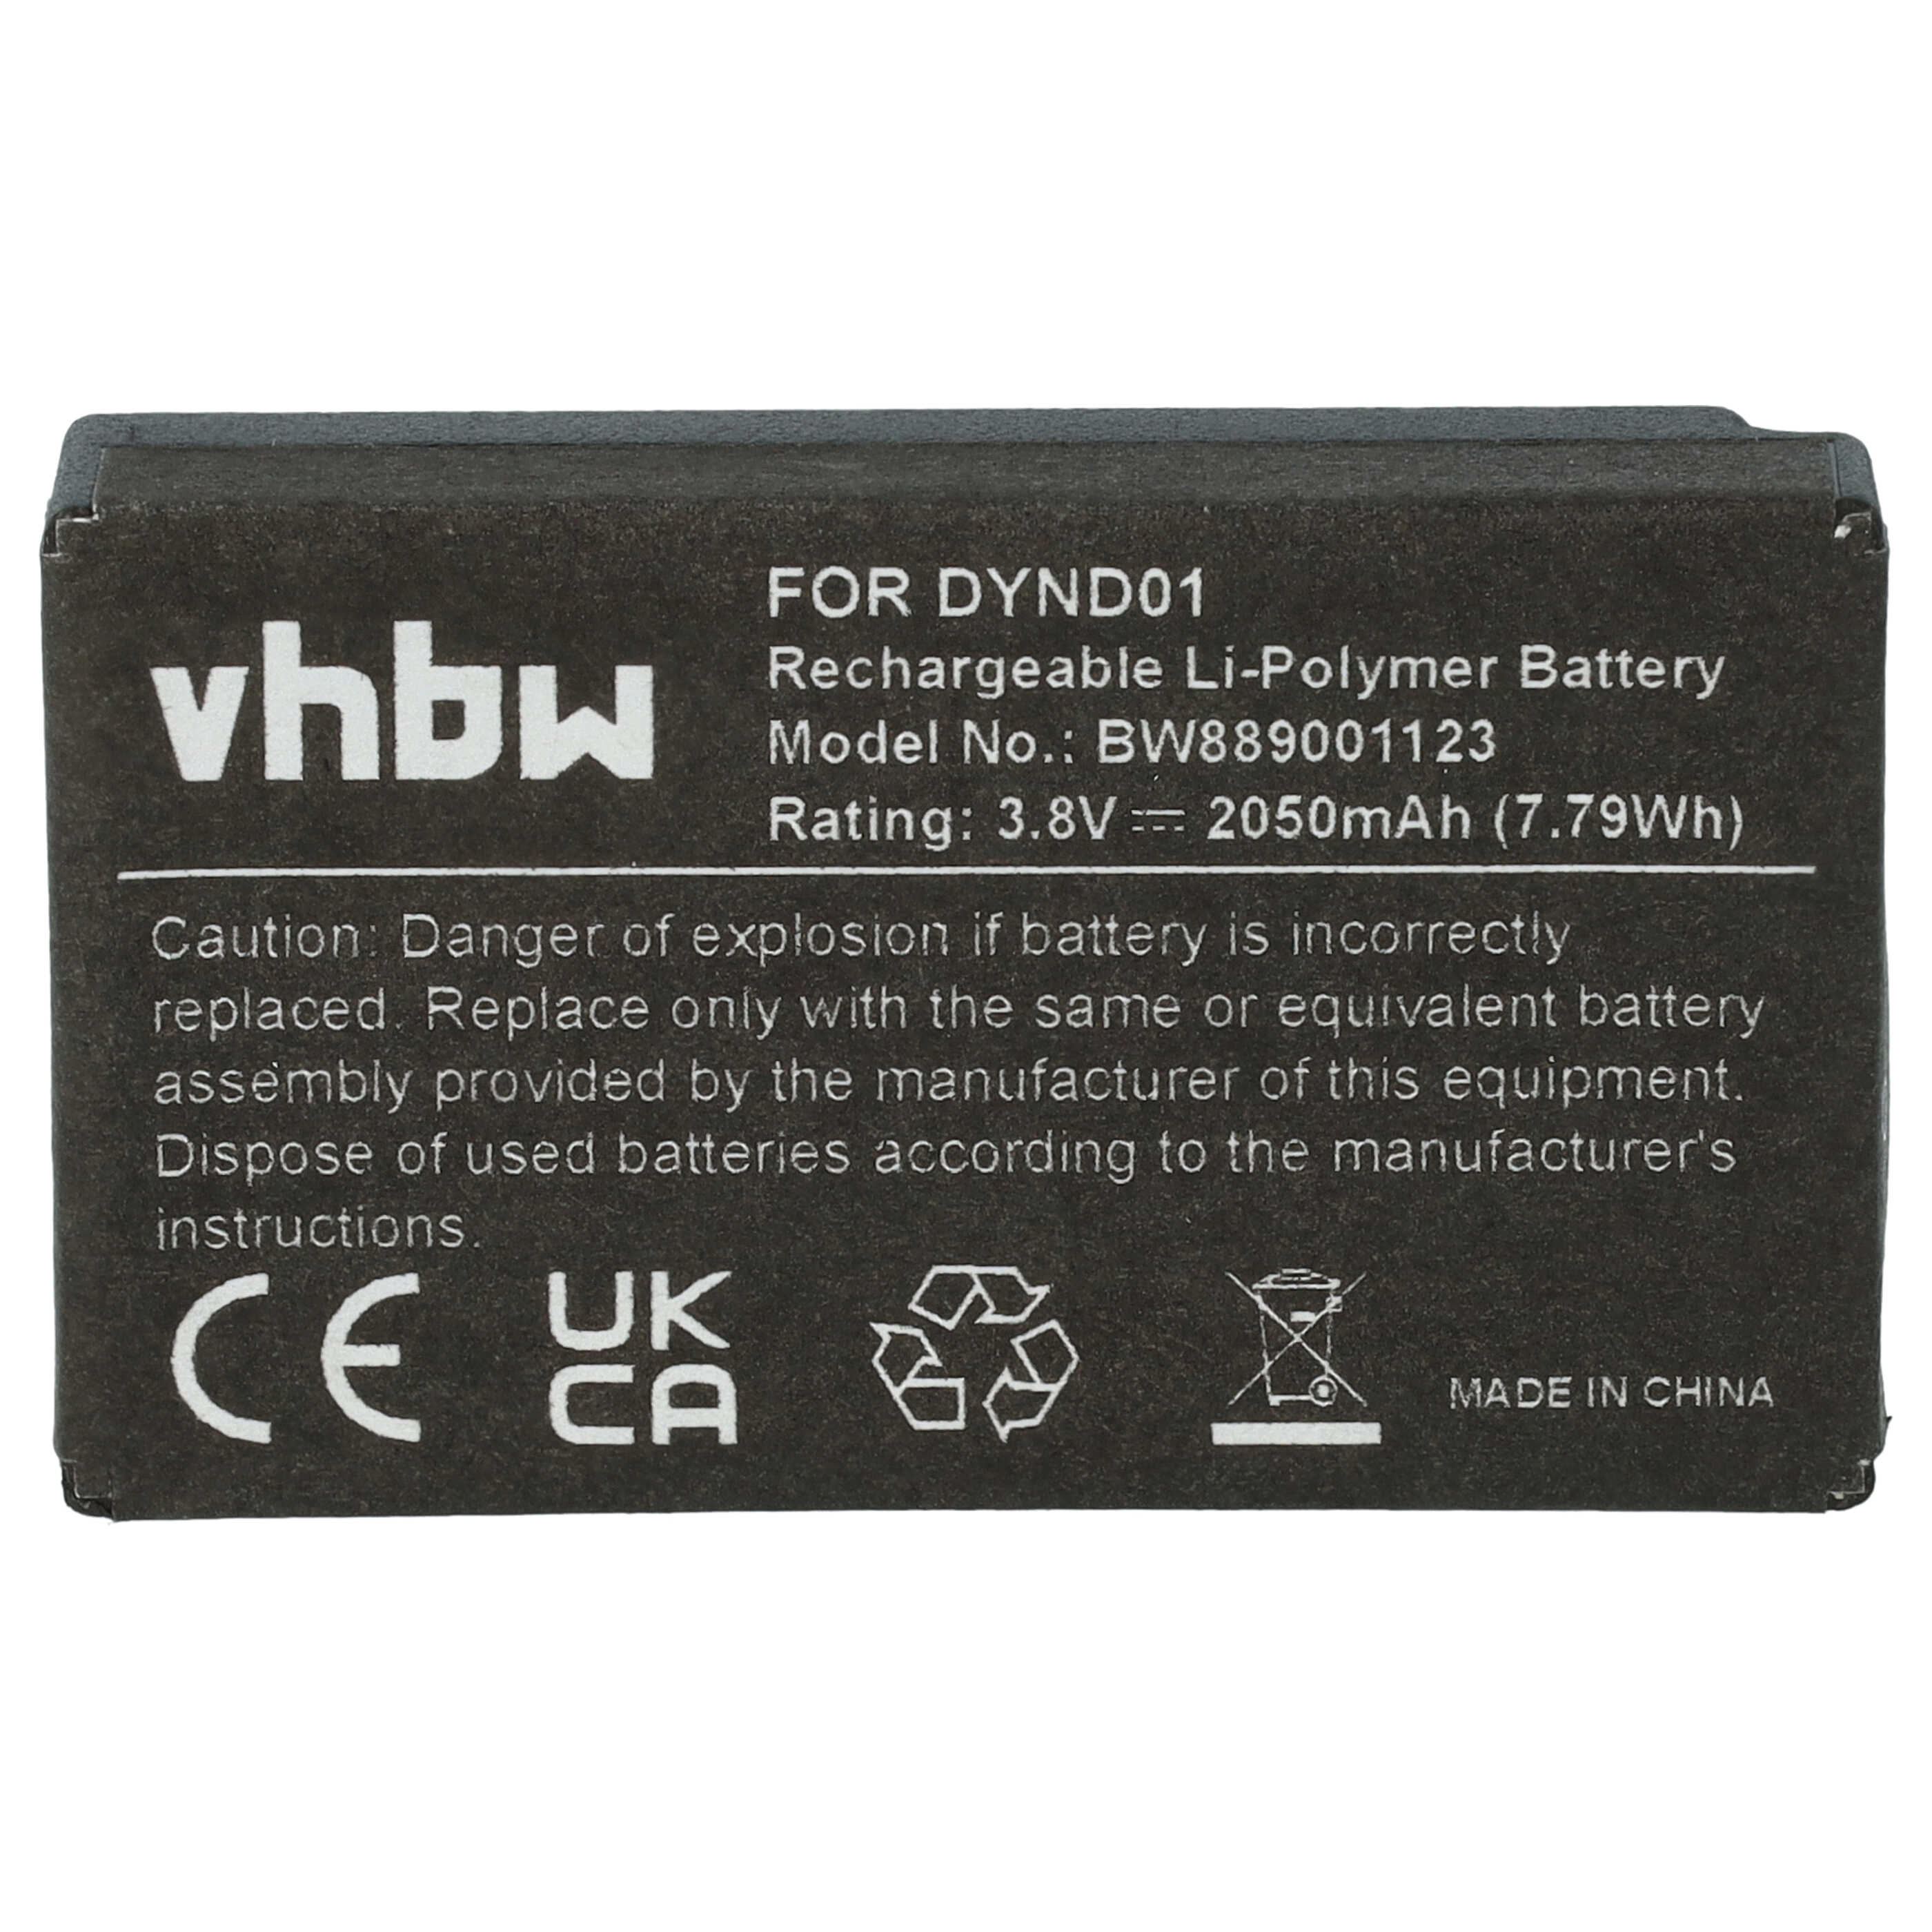  Games Console replaces Microsoft DYND01 for Microsoft - 2050mAh, 3.8V